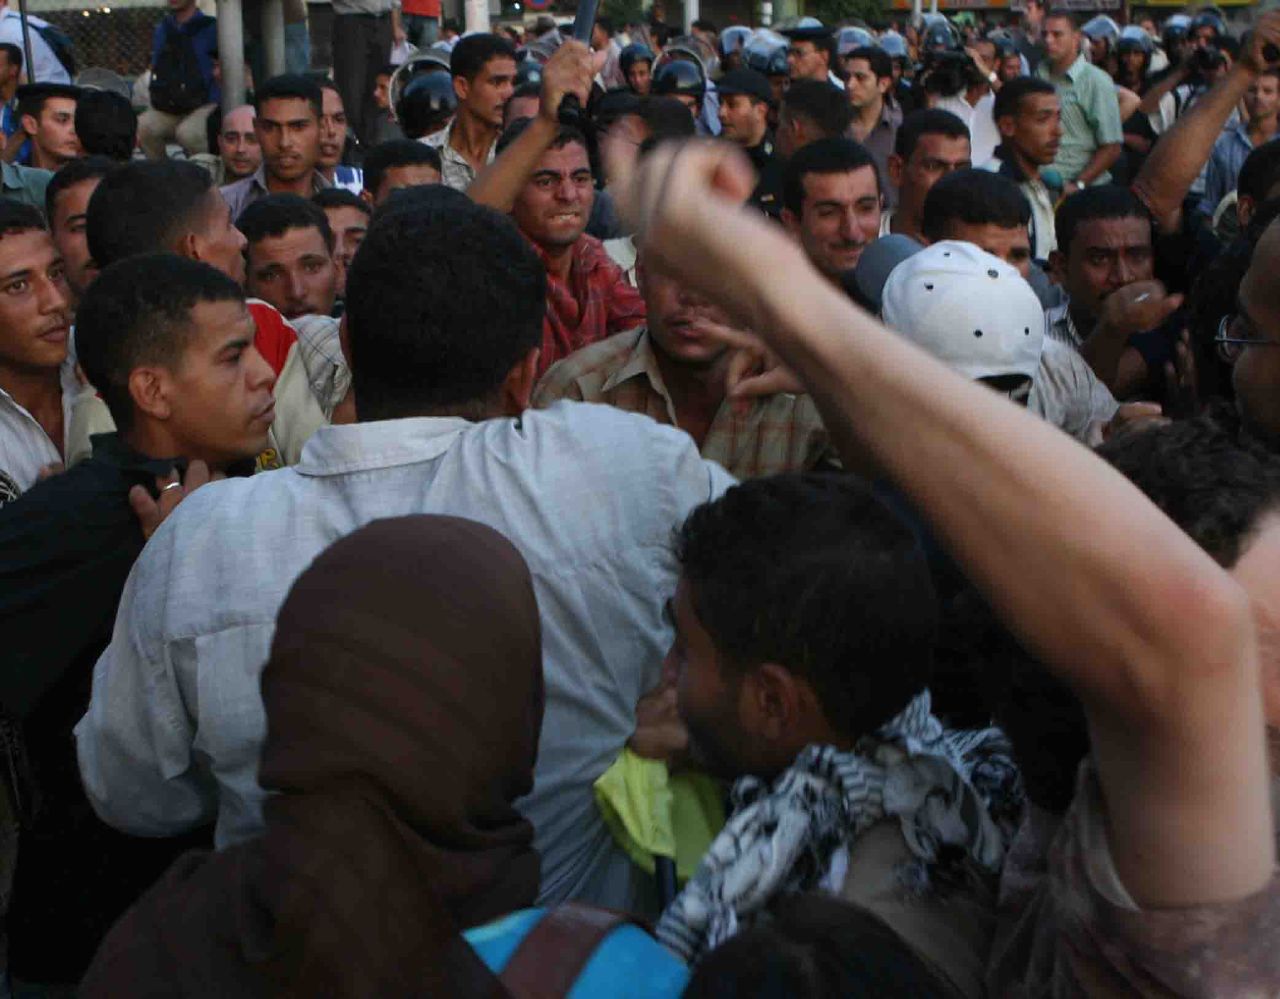 Thugs attacking protesters in Tahrir Sq (Photo by Amr Abdallah, 26 July 2006)